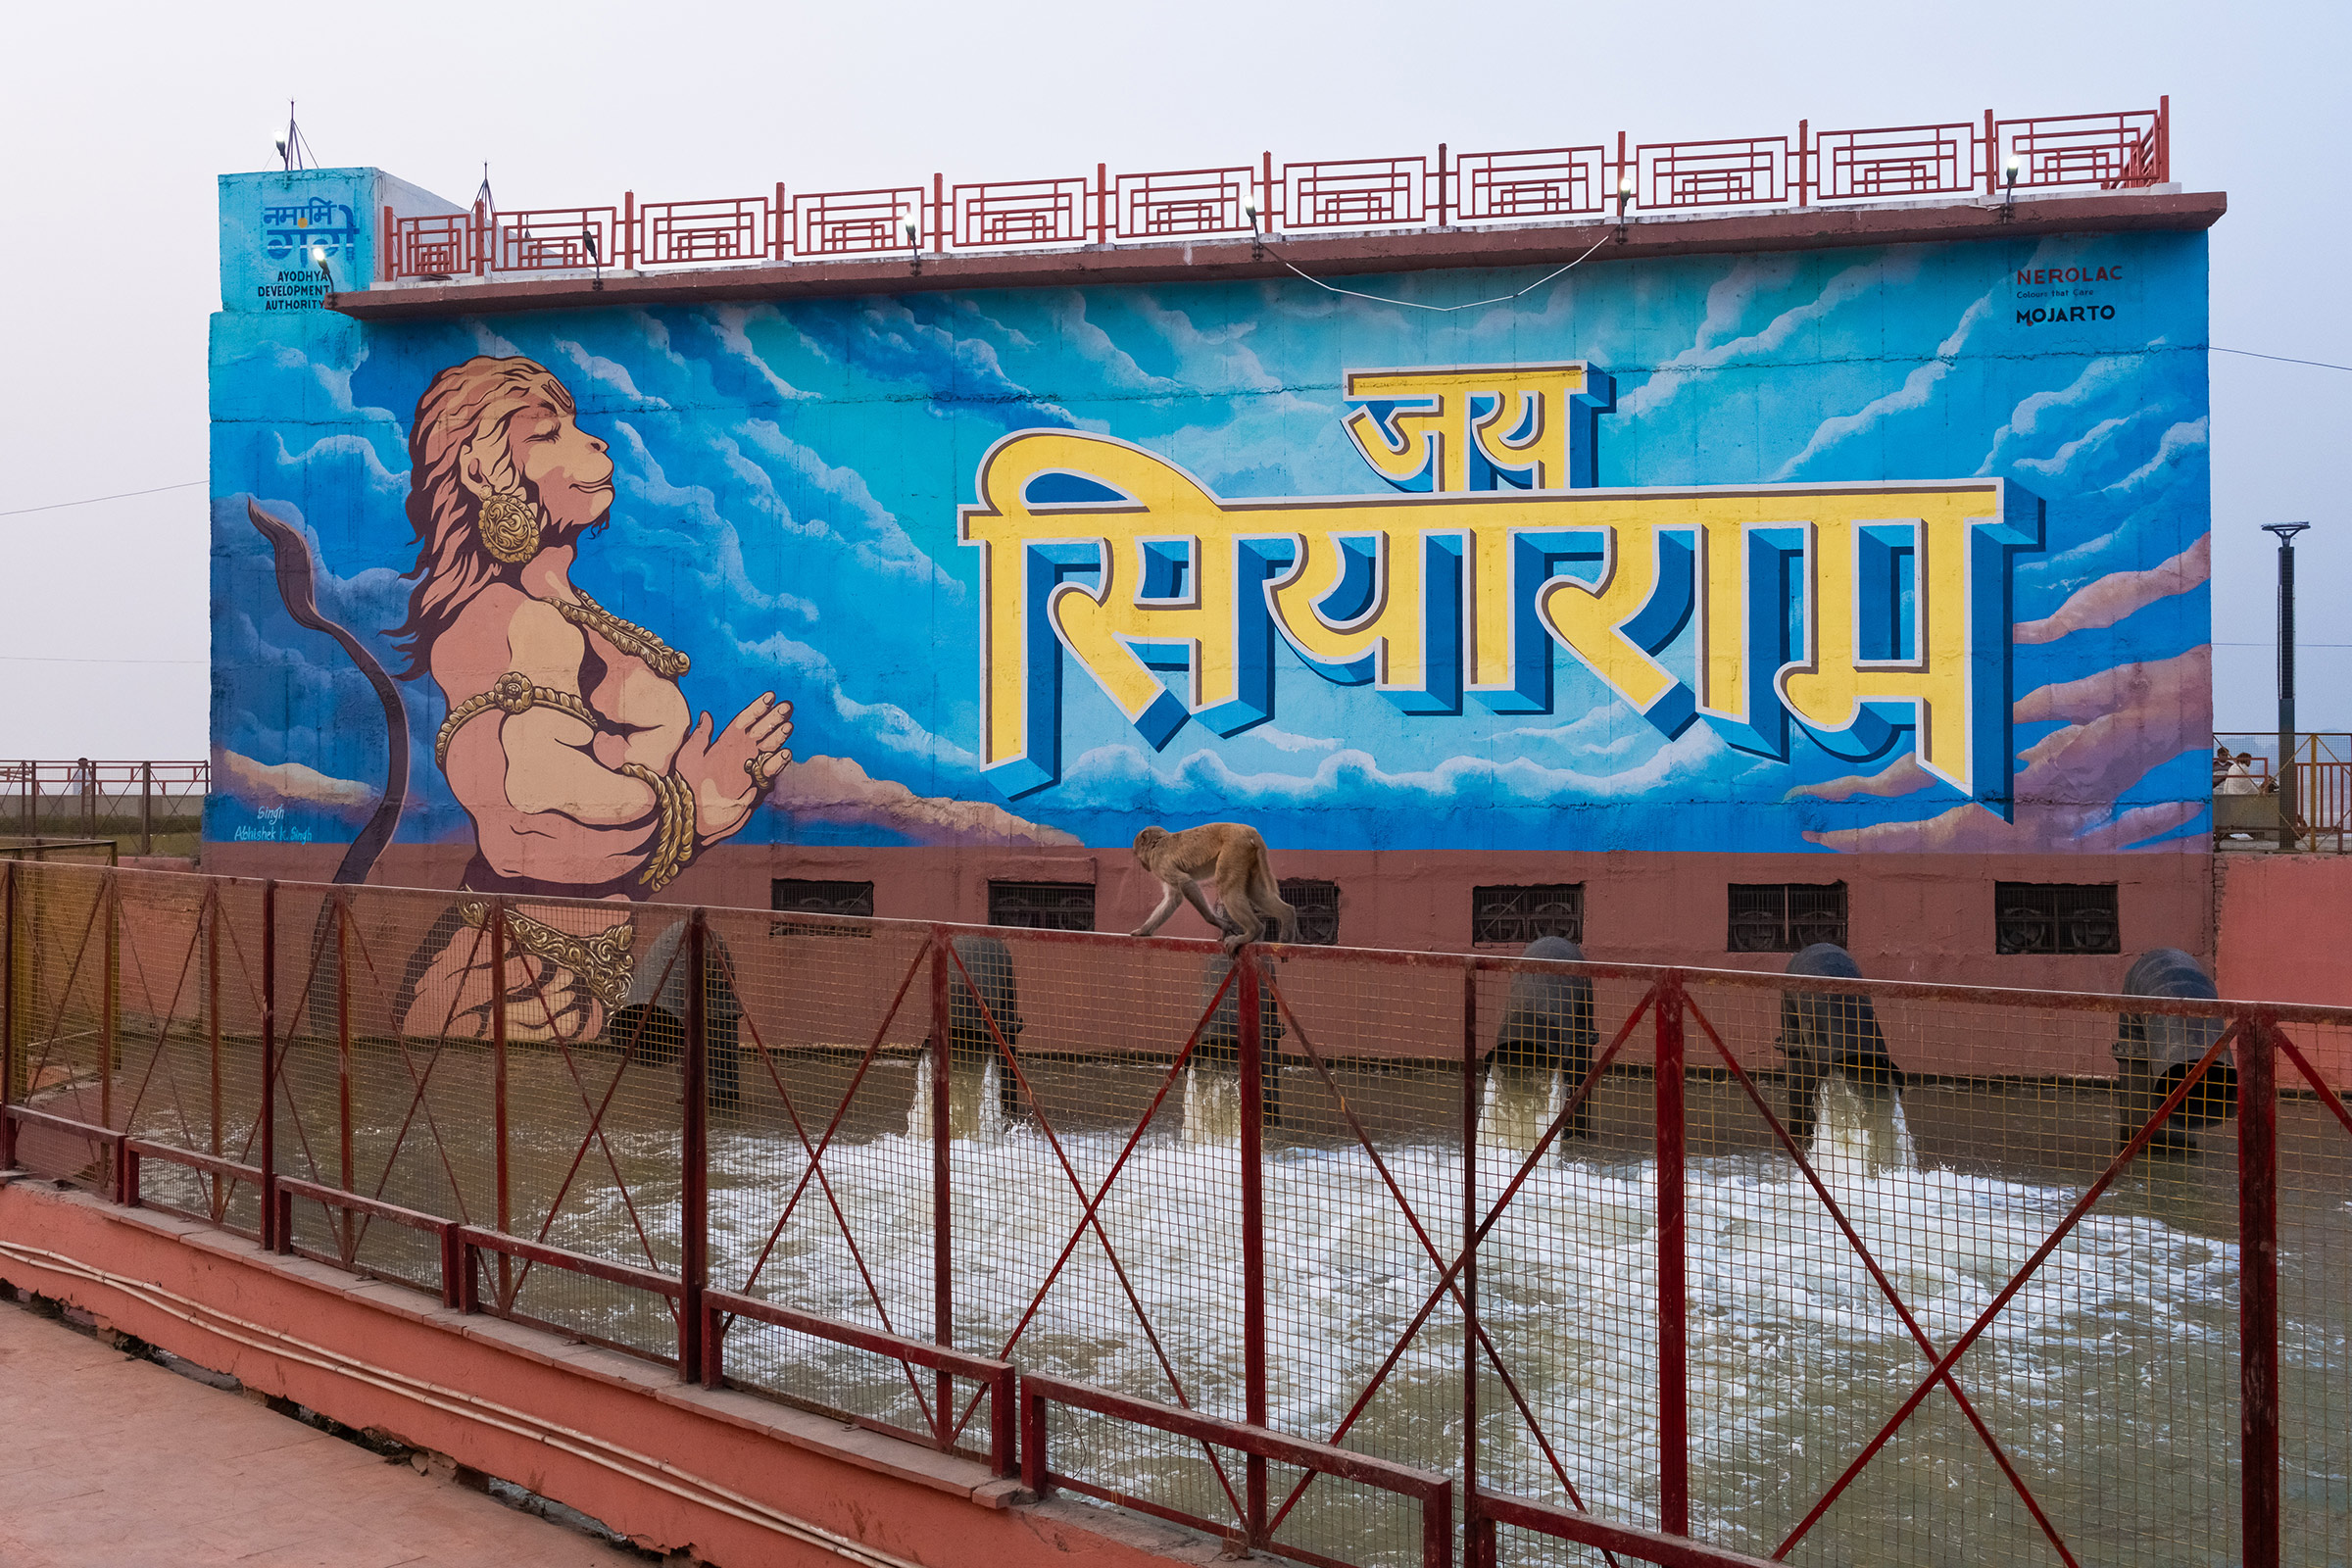 The greeting Jai Siyaram ("Glory to Sita and Rama") and a motif of Hanuman is seen on the pump house that treats water from the Saryu river and channels it into the Ram ki Paidi, on Jan. 18.